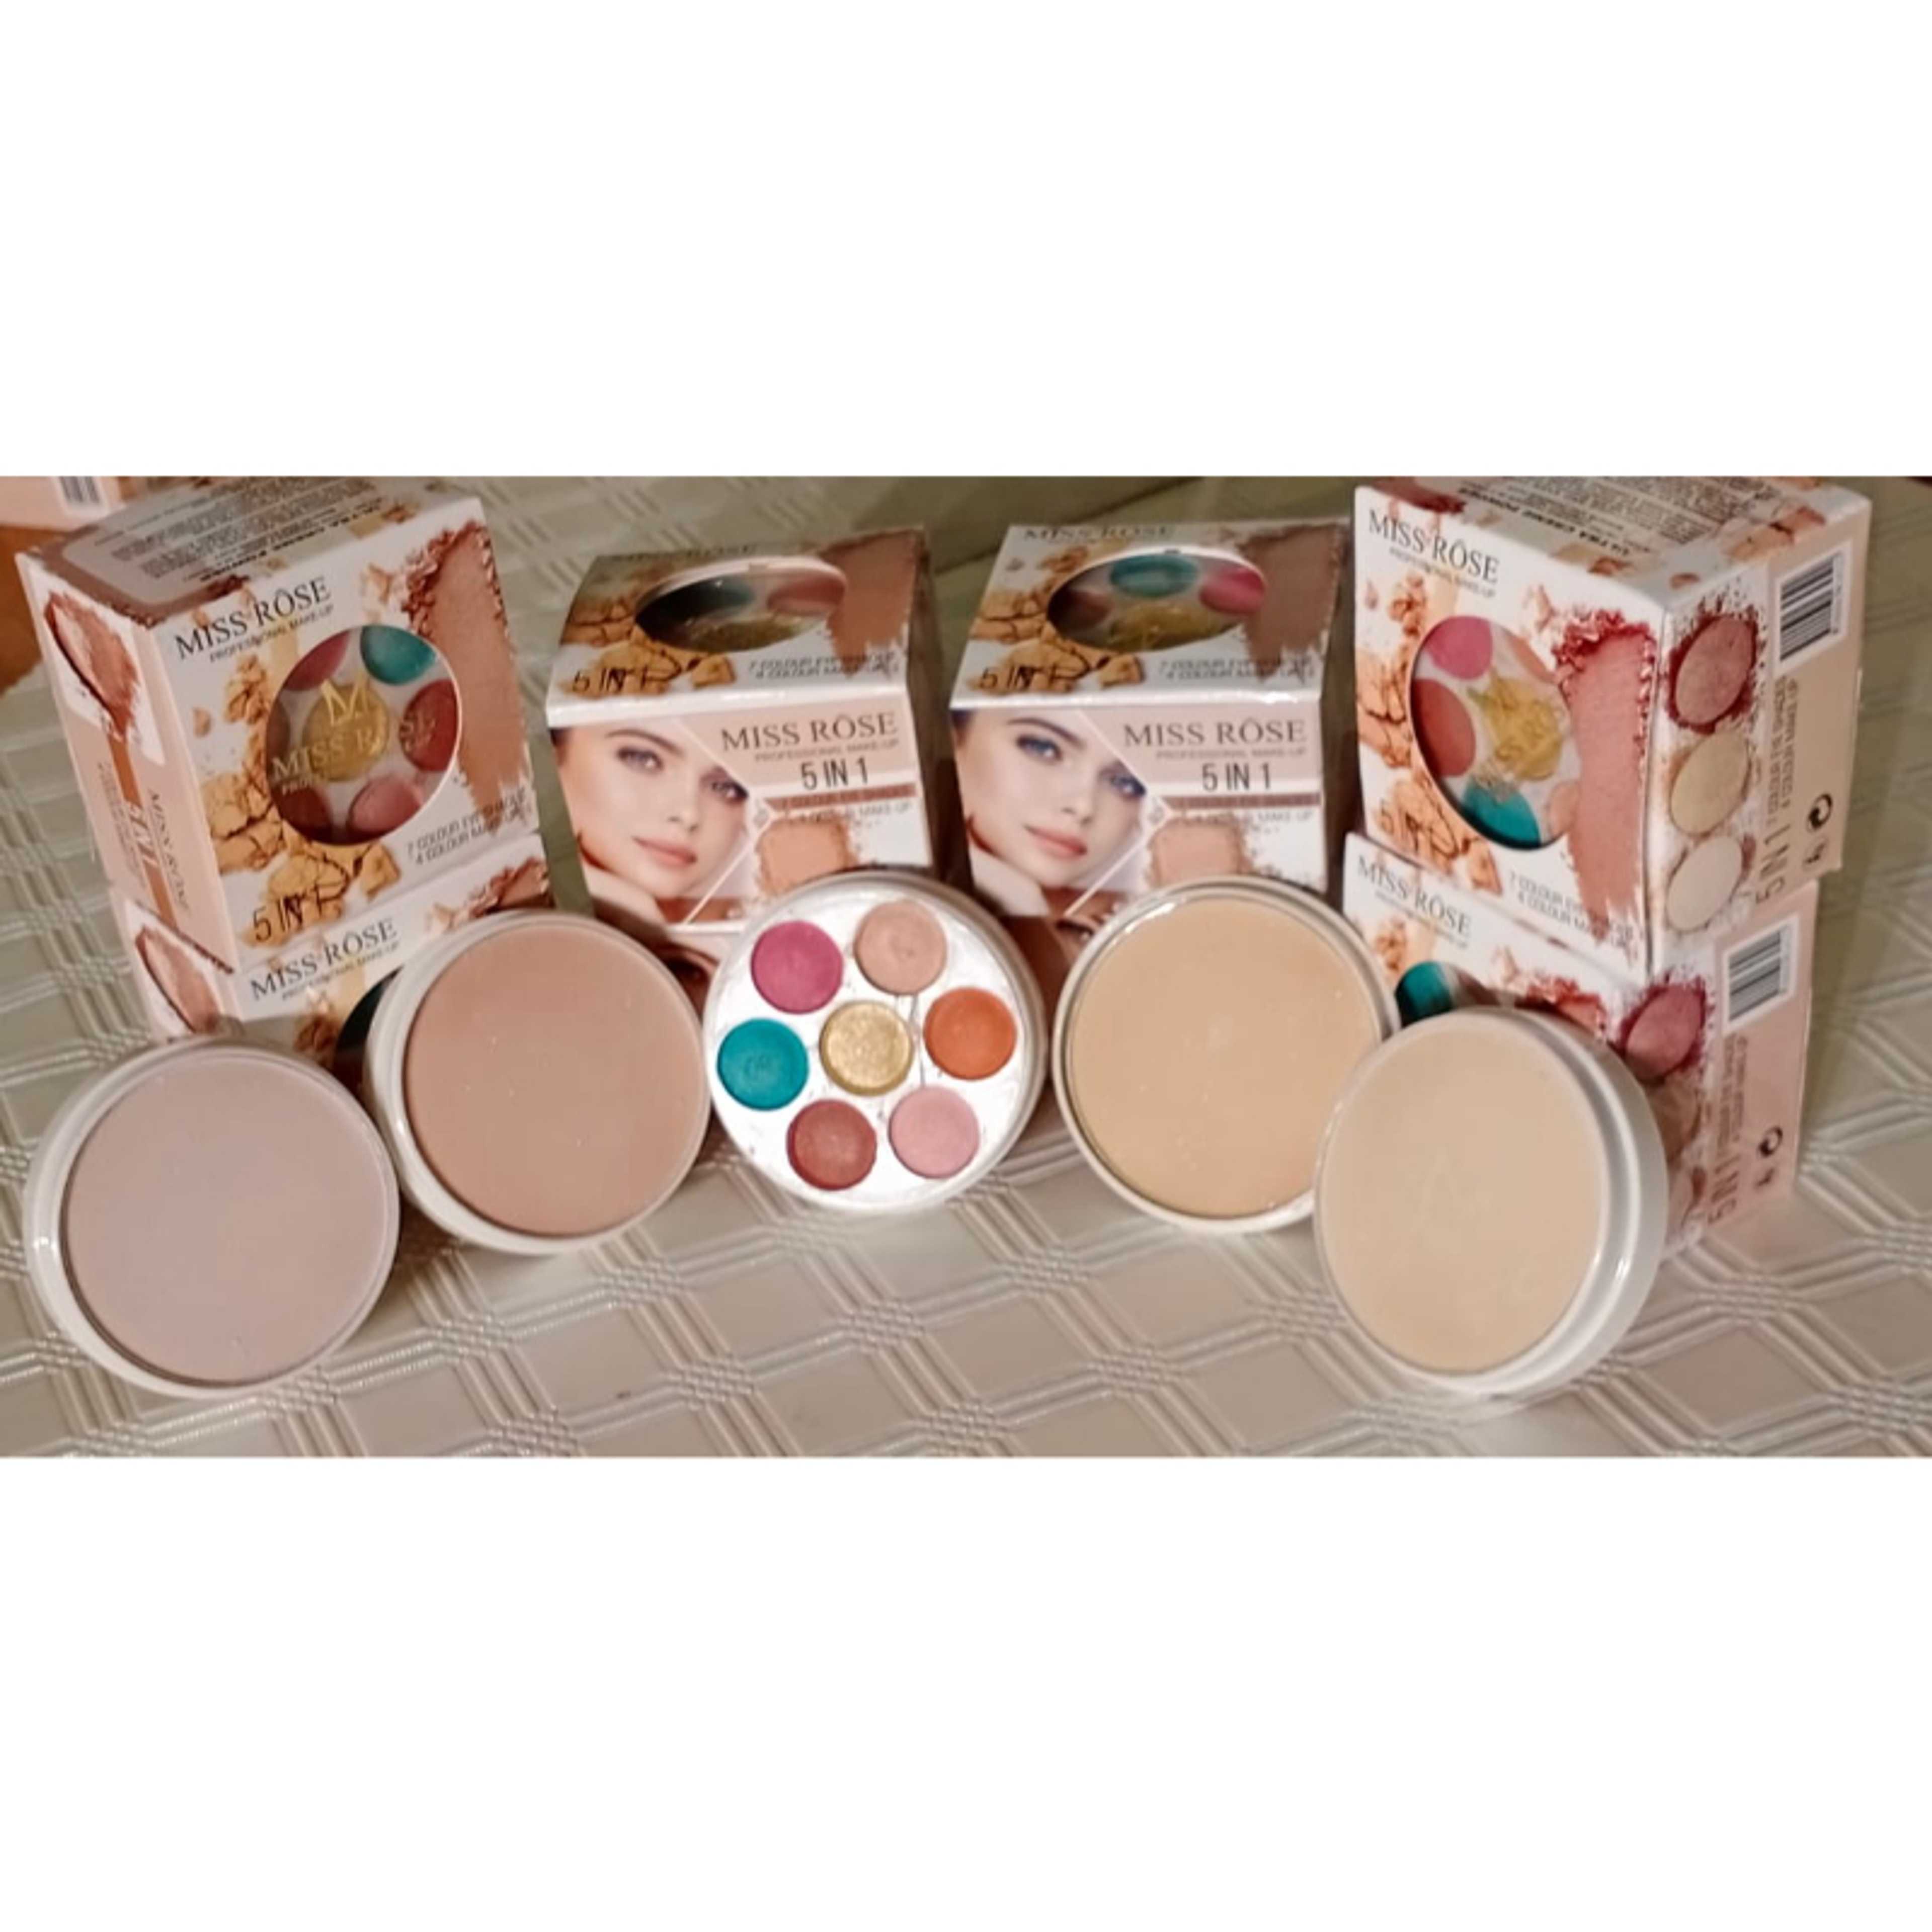 MISS ROSE - 5 IN 1 (FACE POWDER & HIGHLITHER)